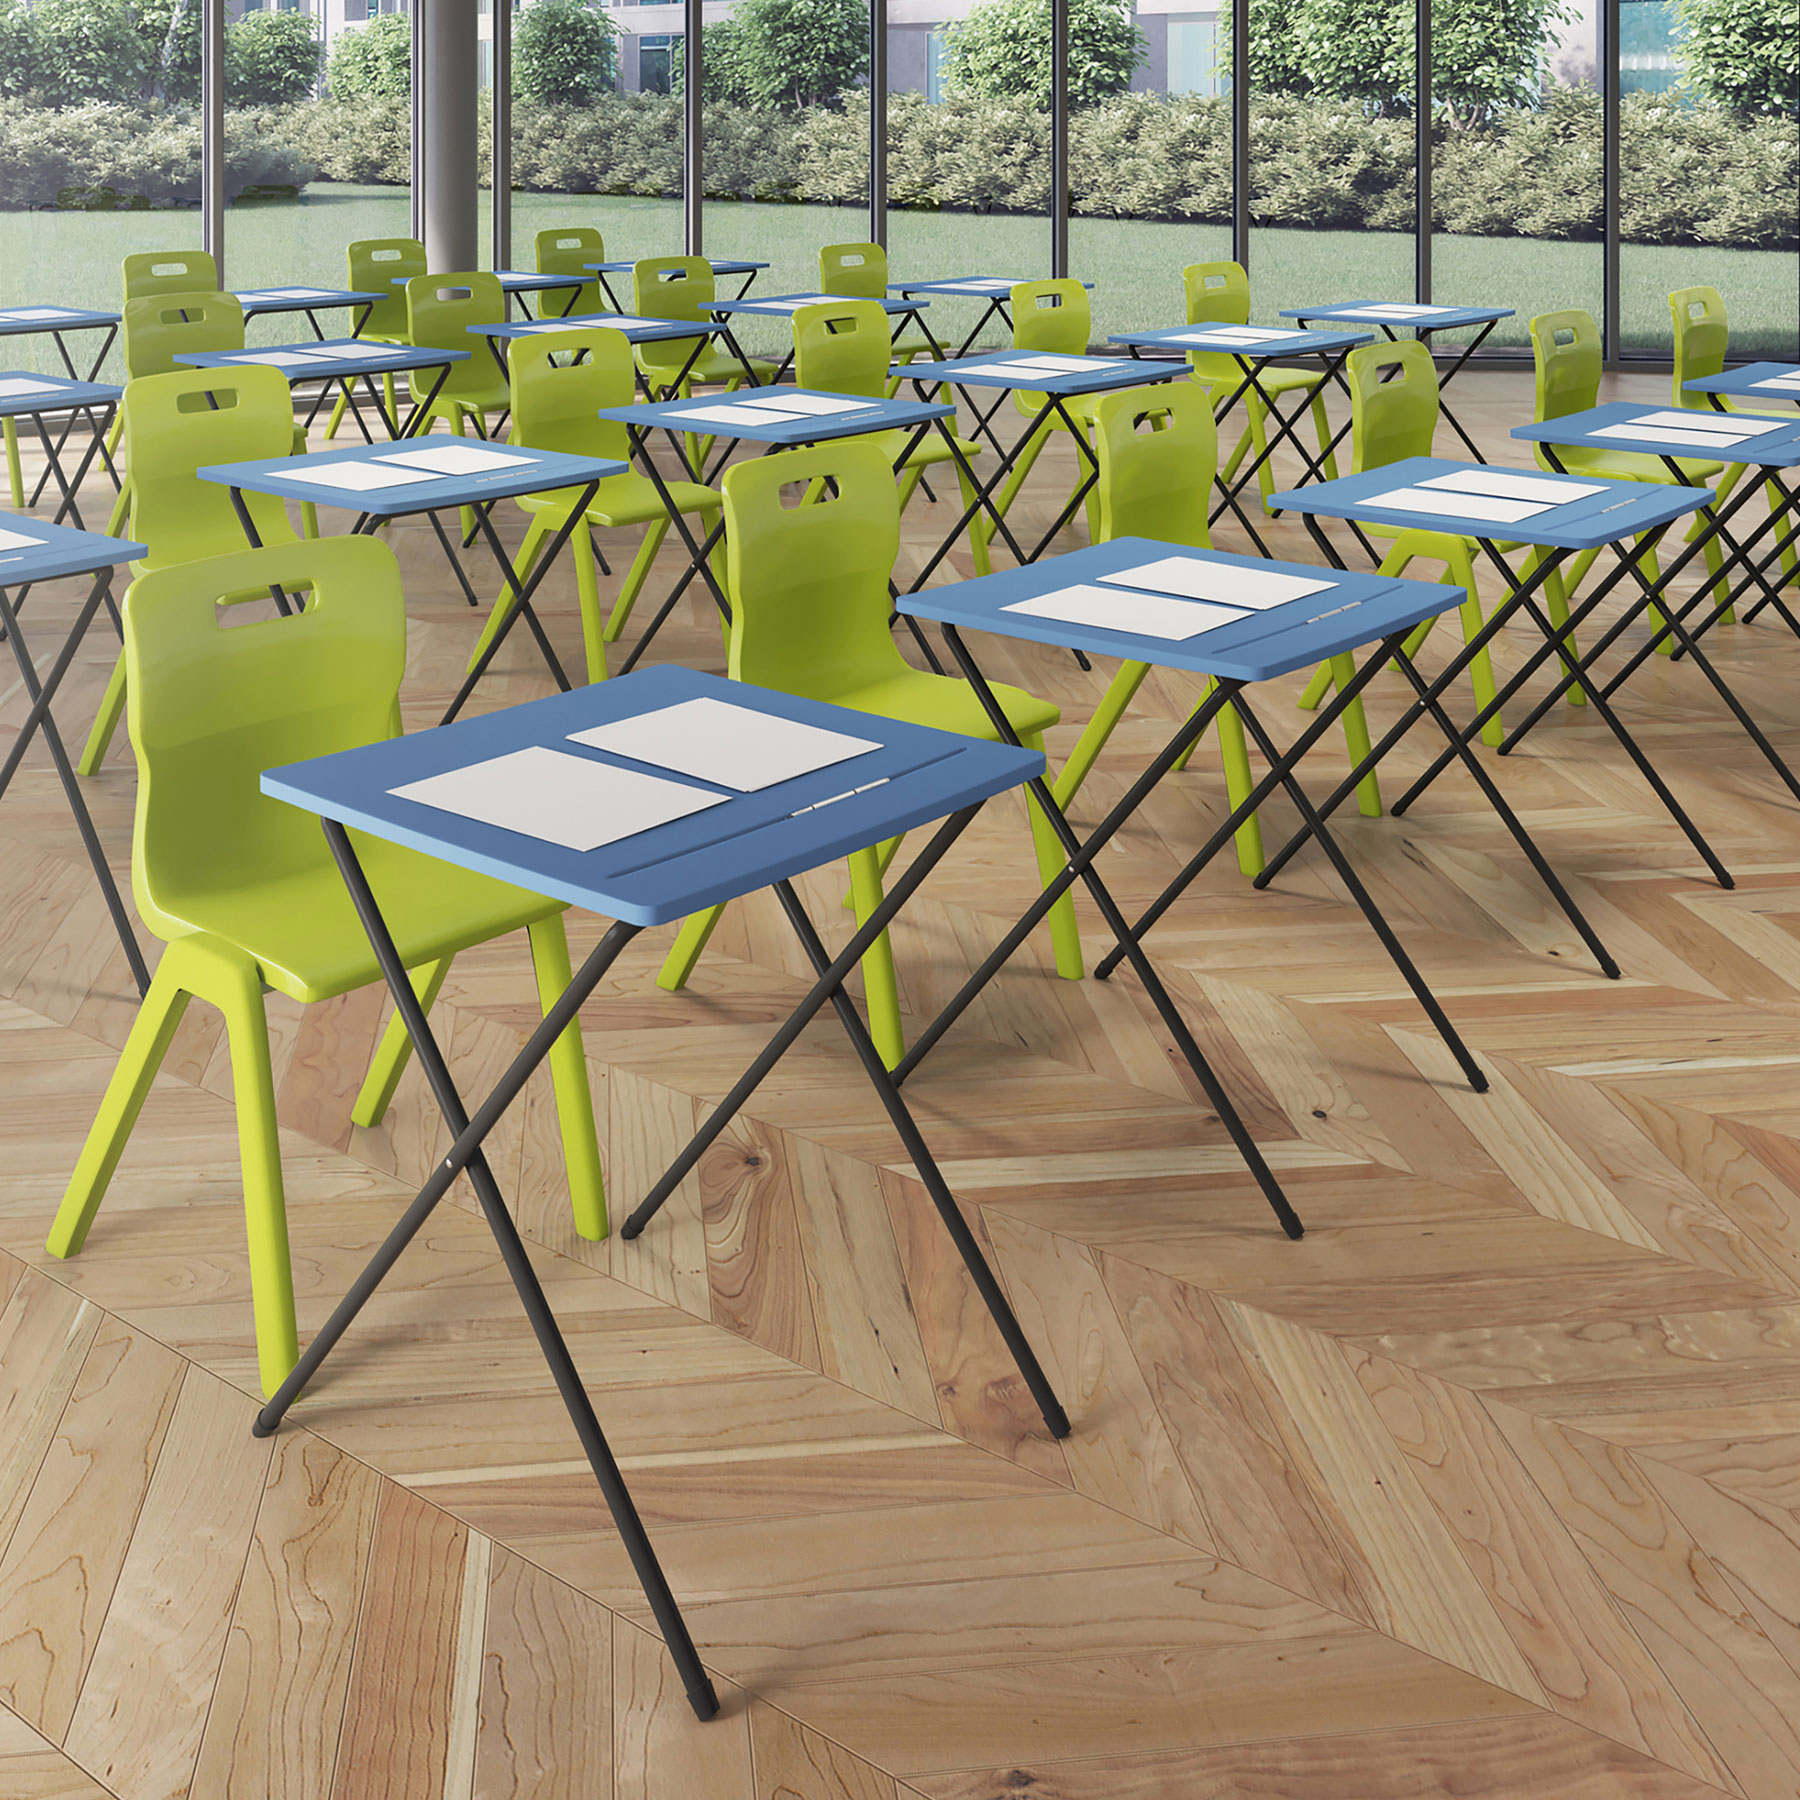 Exam Furniture - Chairs & Tables